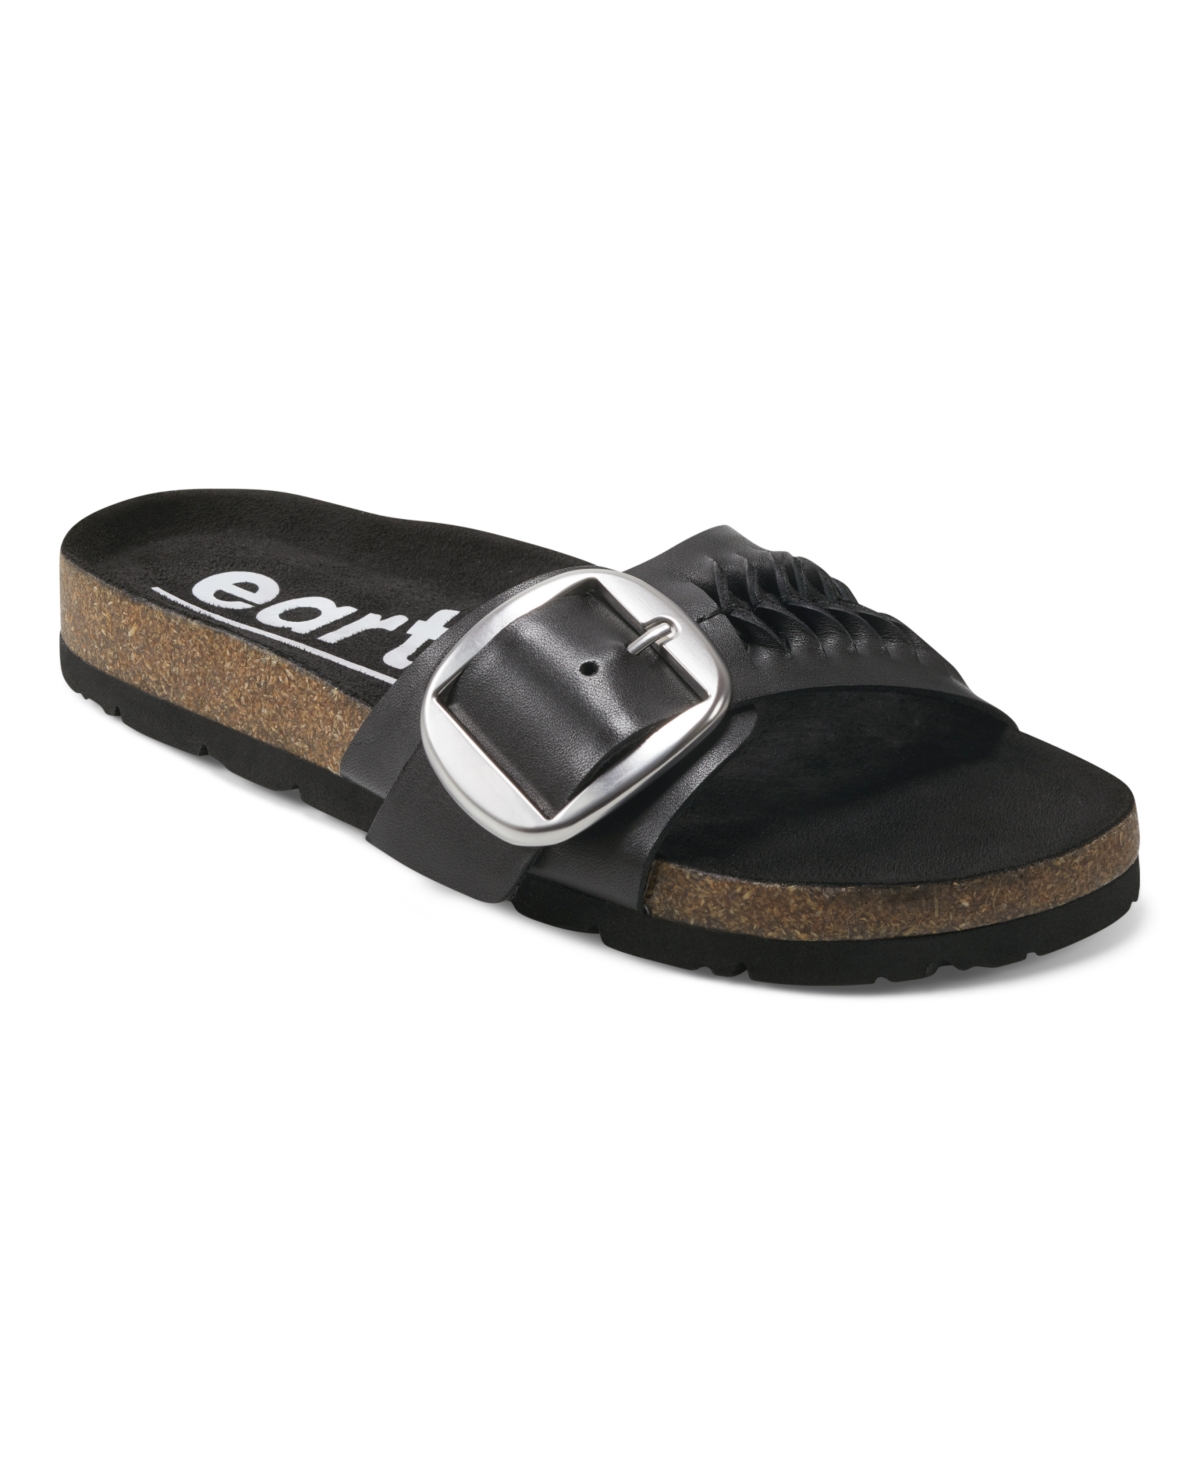 Earth Women's Albina Woven Round Toe Casual Flat Sandals - Black Leather